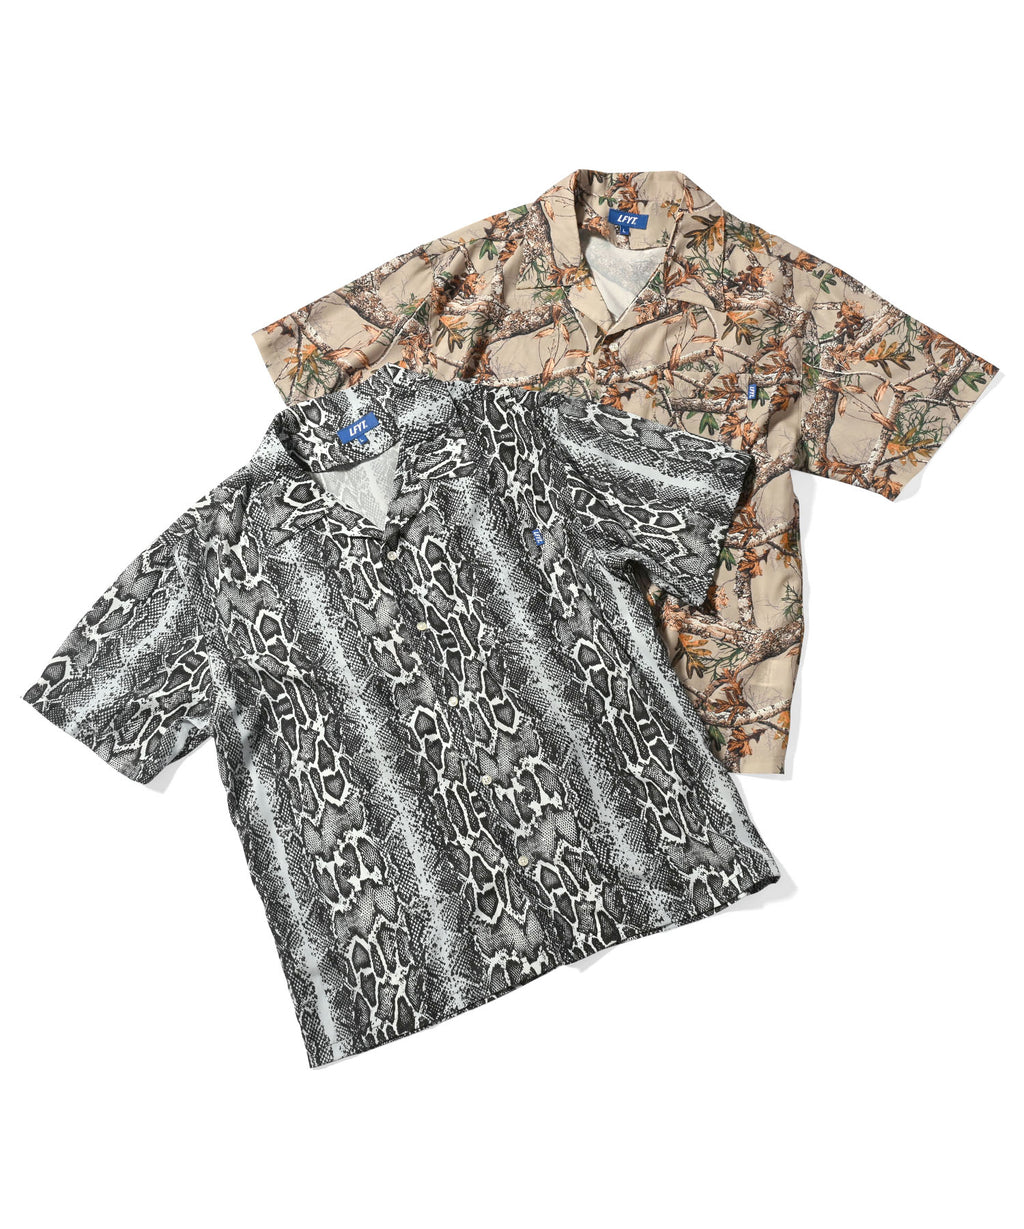 LFYT - PATTERNED OPEN COLLAR S/S SHIRT LS240203